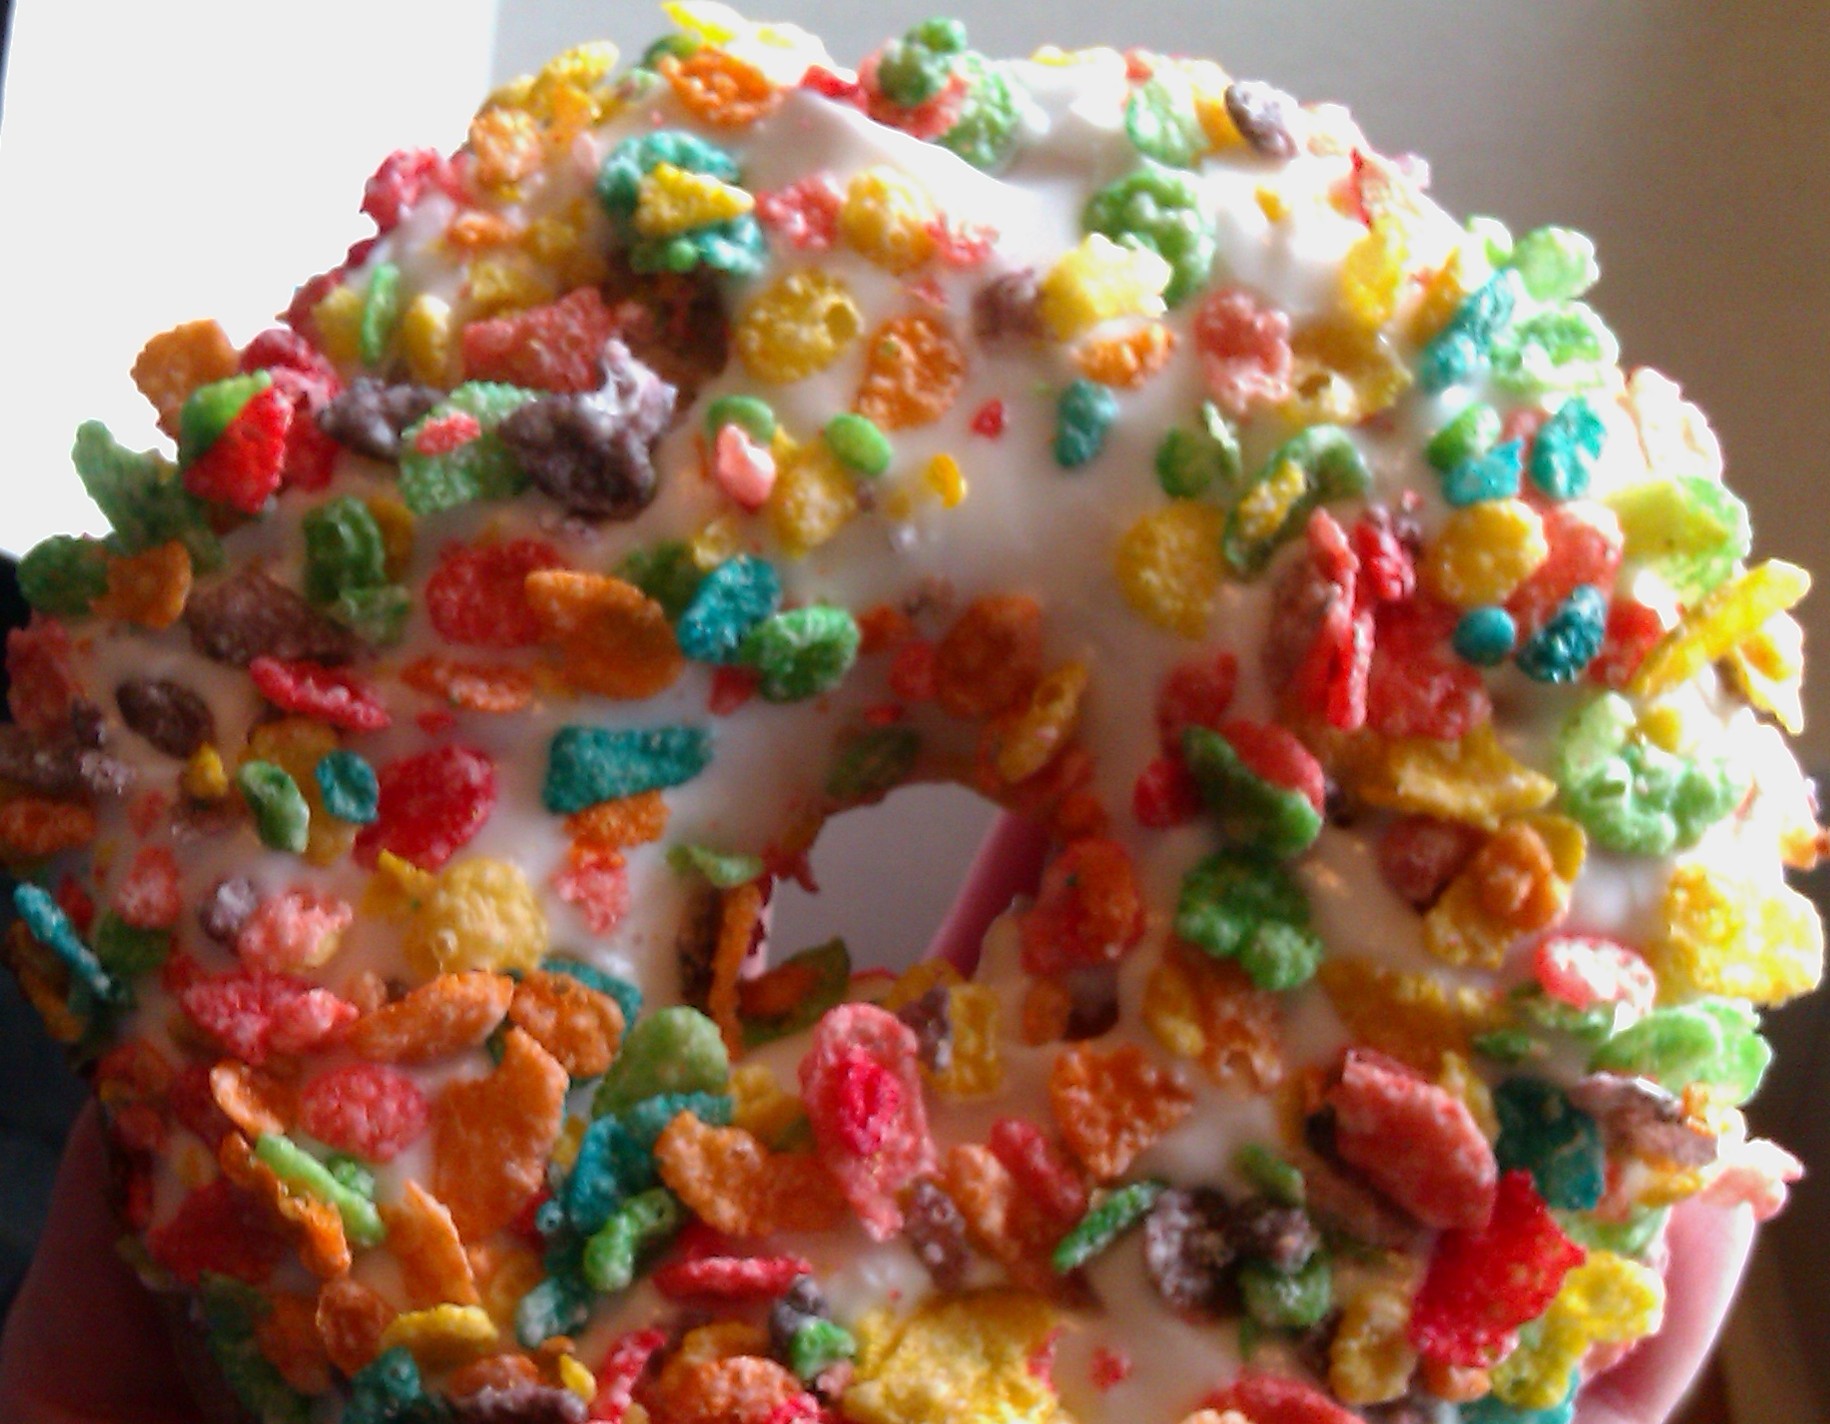 Baked Strawberry Donuts with Strawberry Glaze and Fruity Pebbles